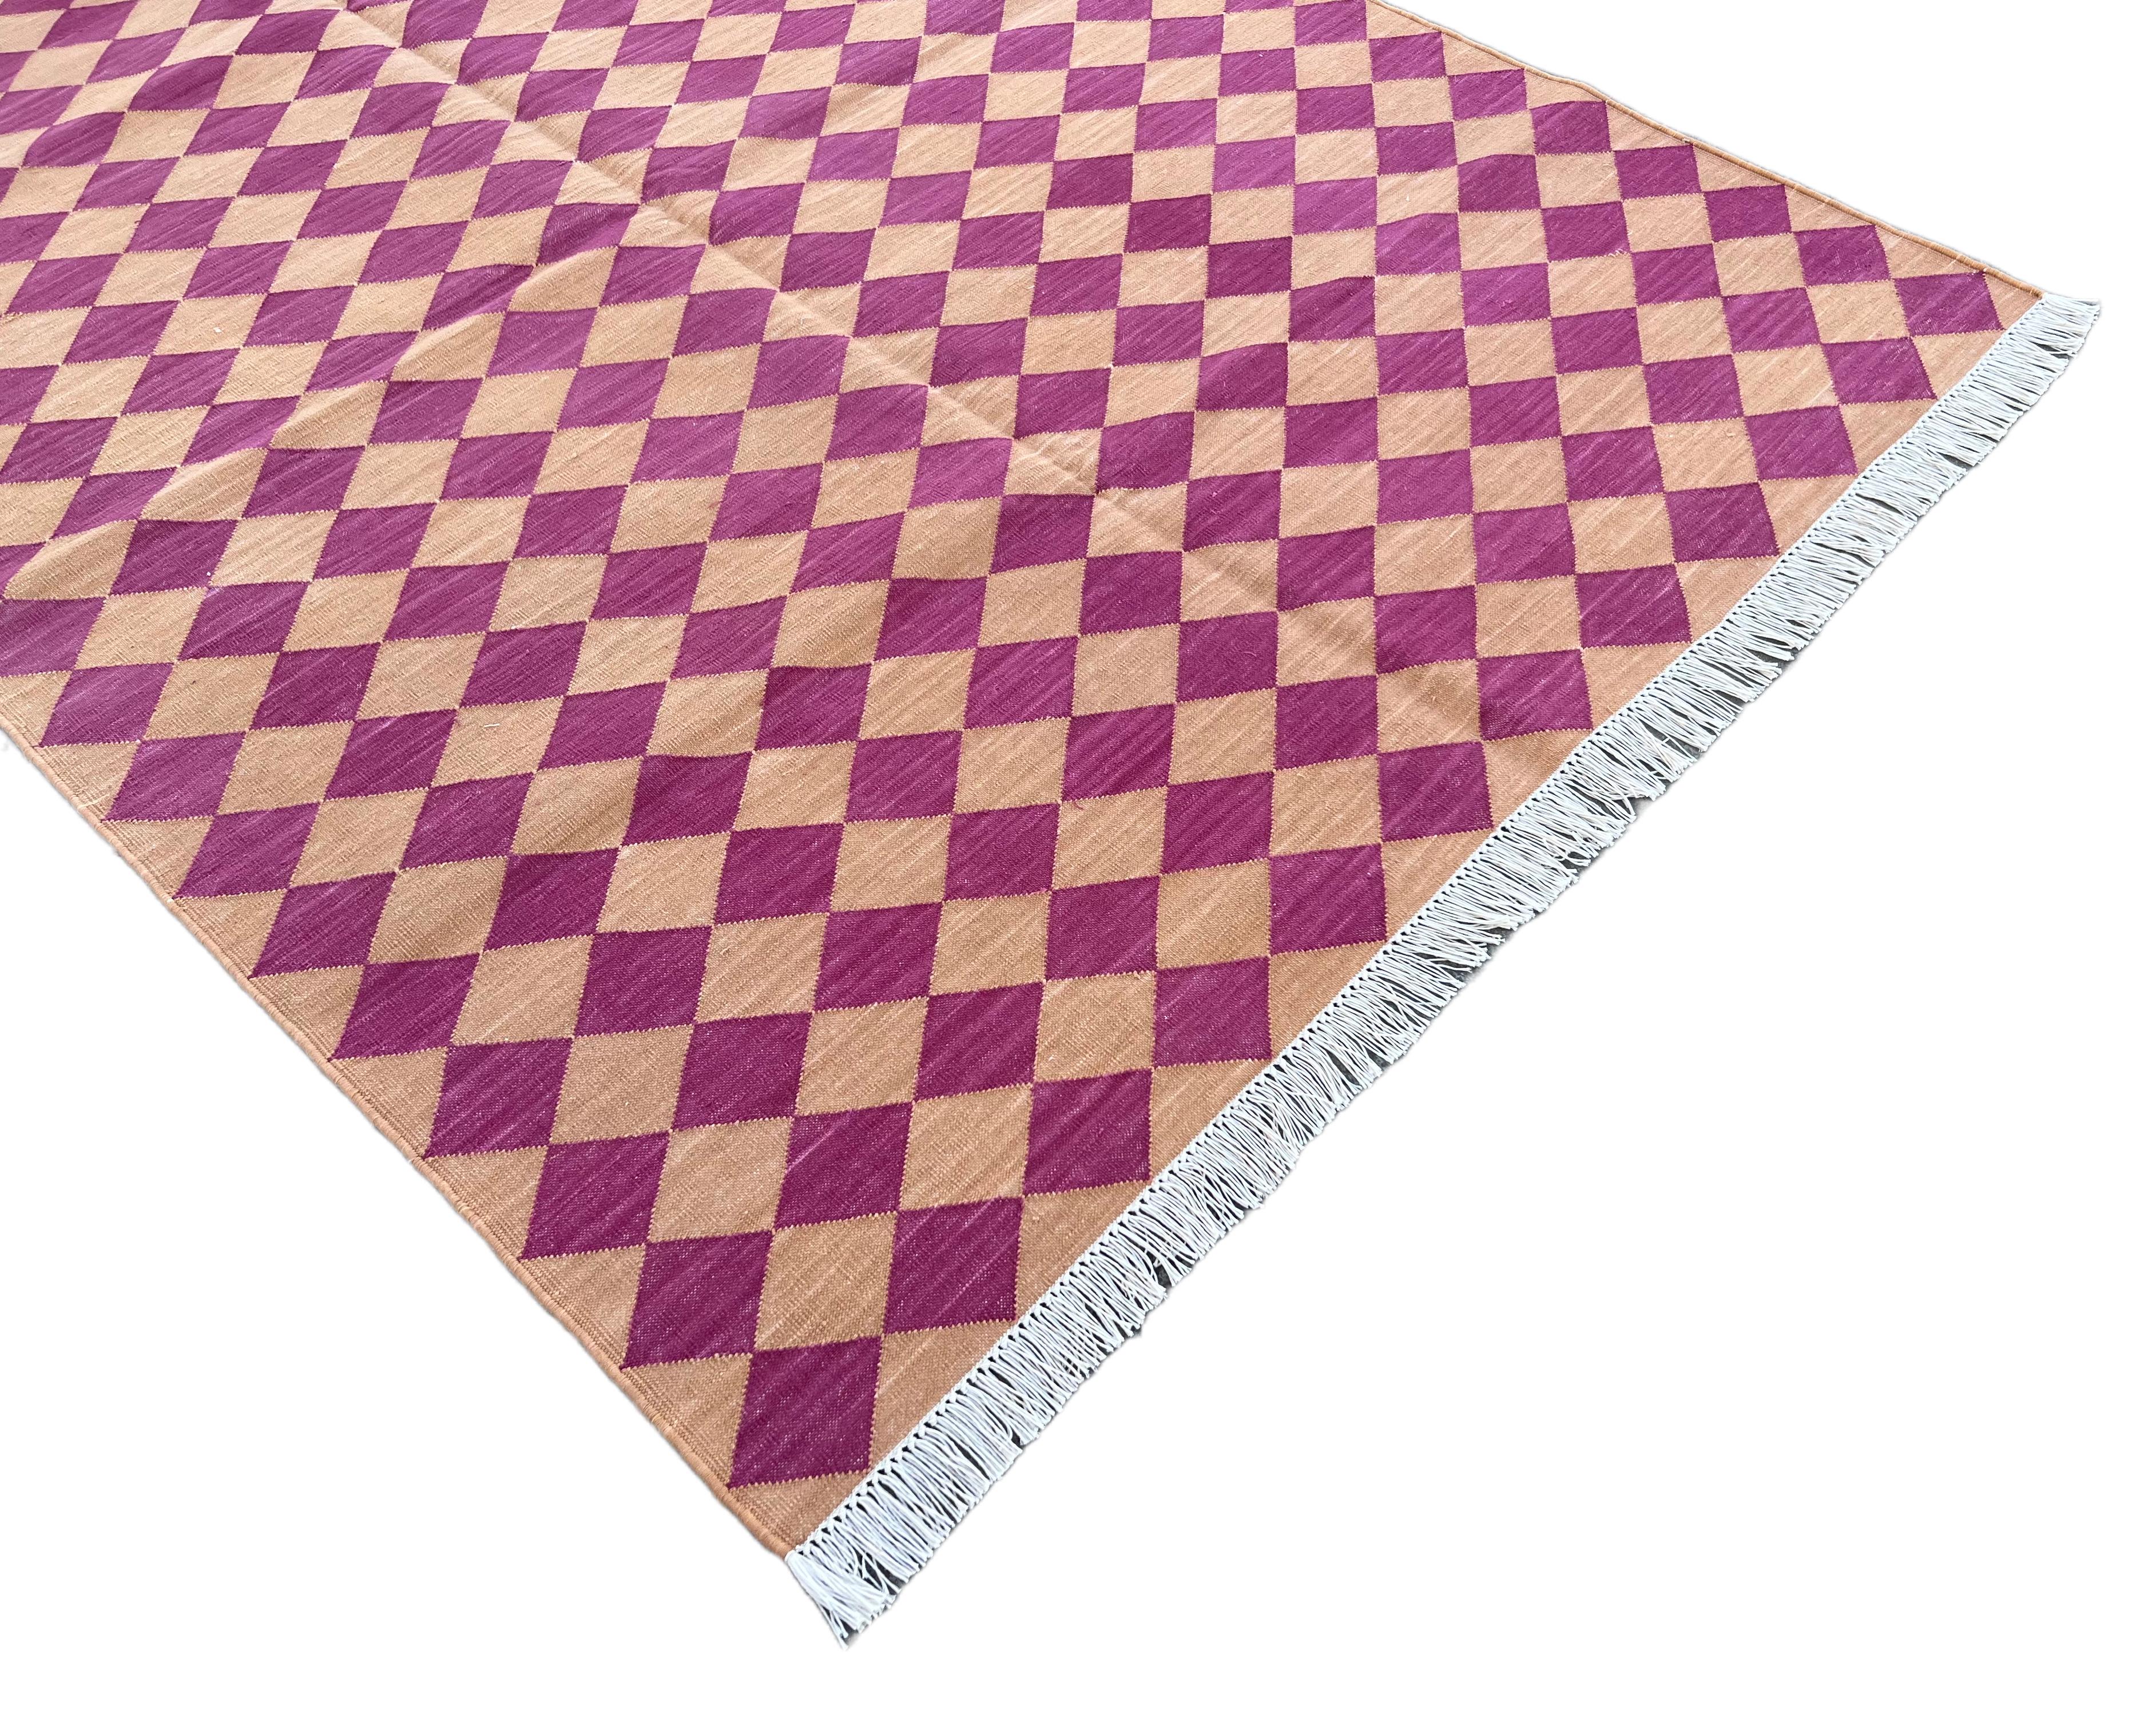 Hand-Woven Handmade Cotton Area Flat Weave Rug, 4x6 Pink And Tan Checked Indian Dhurrie Rug For Sale